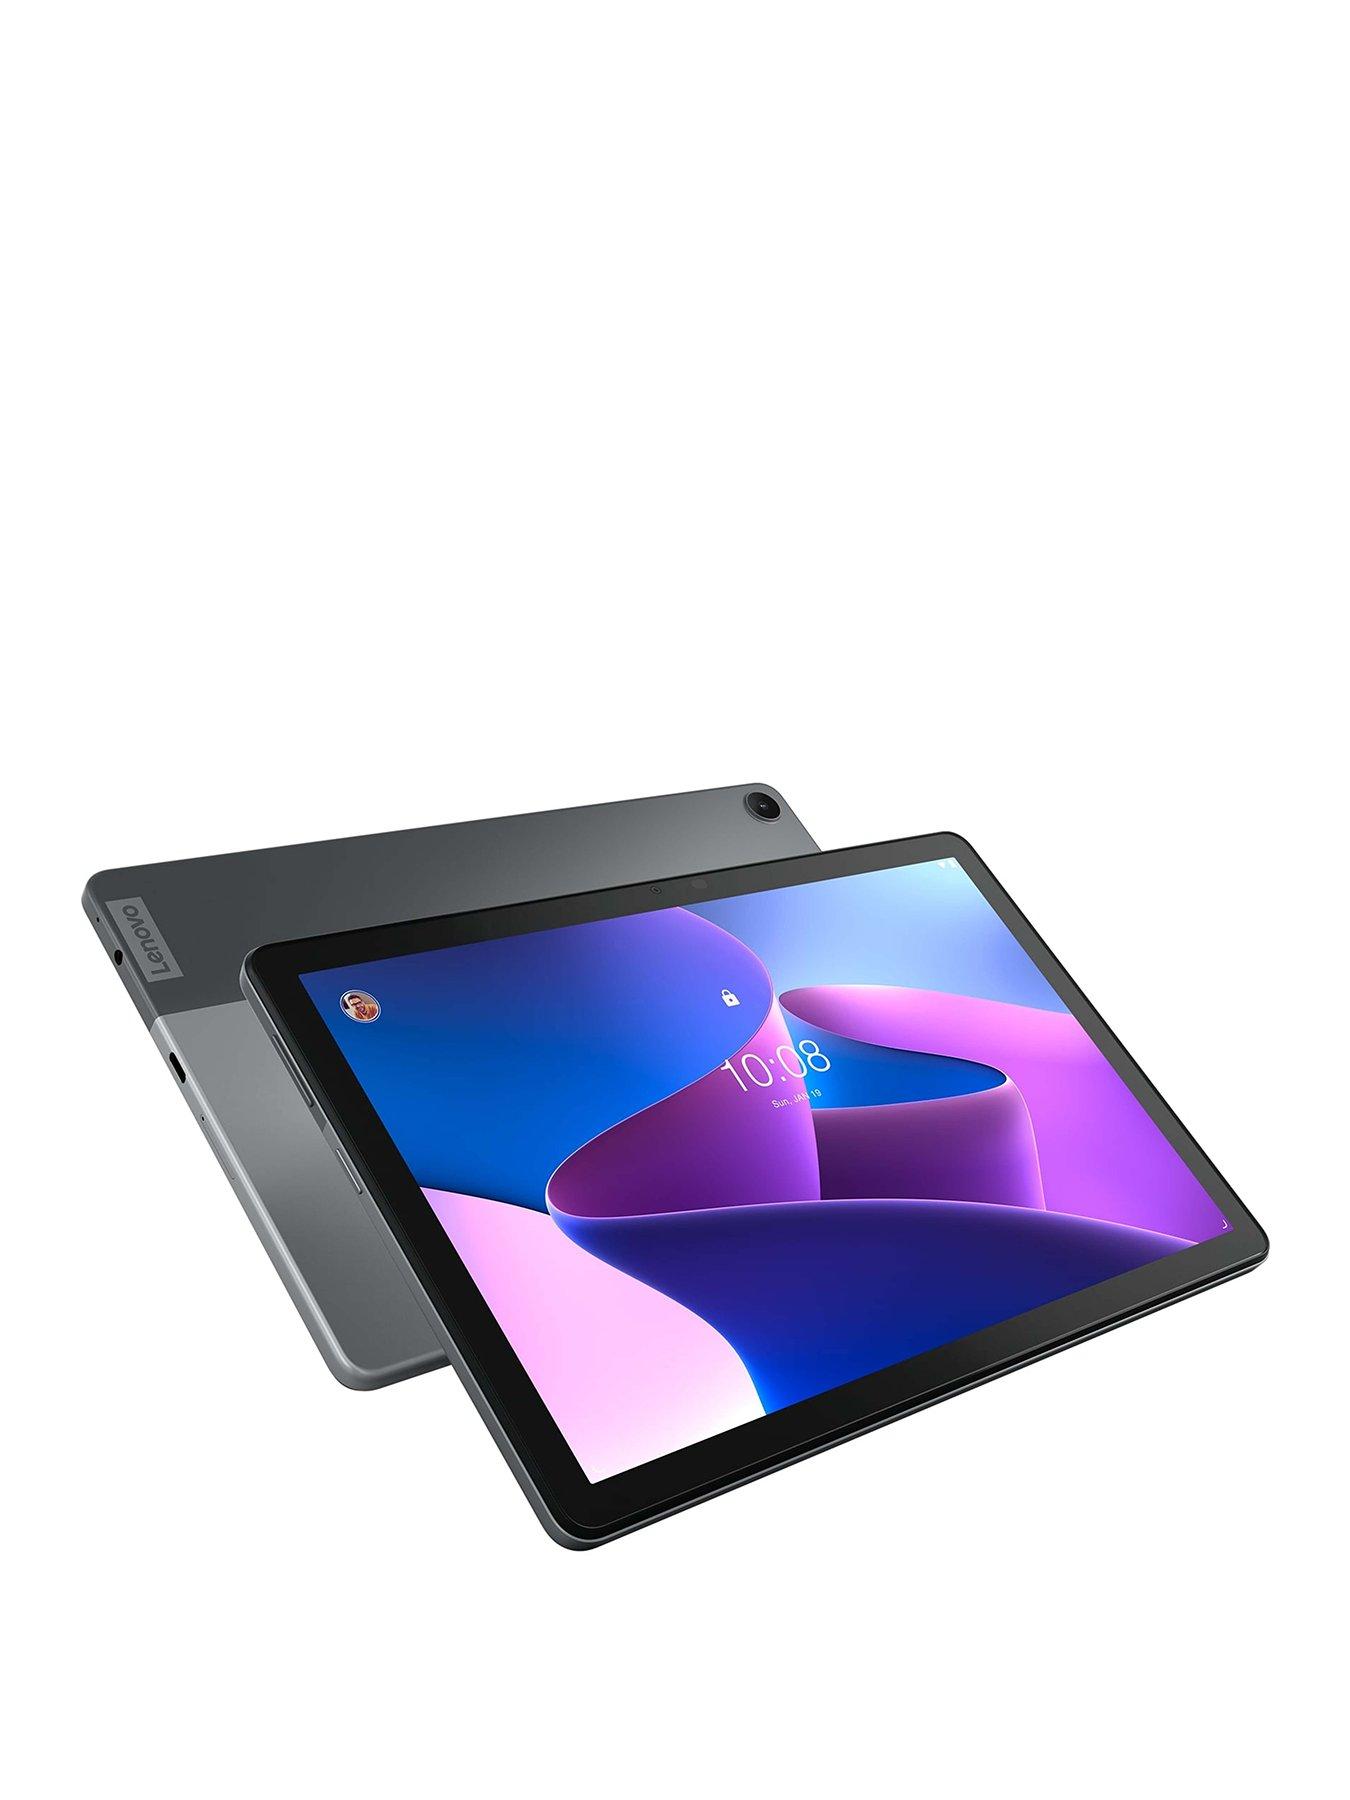 The Lenovo Tab M10 Plus Tablet Is a Cheaper iPad and a Kindle Rival